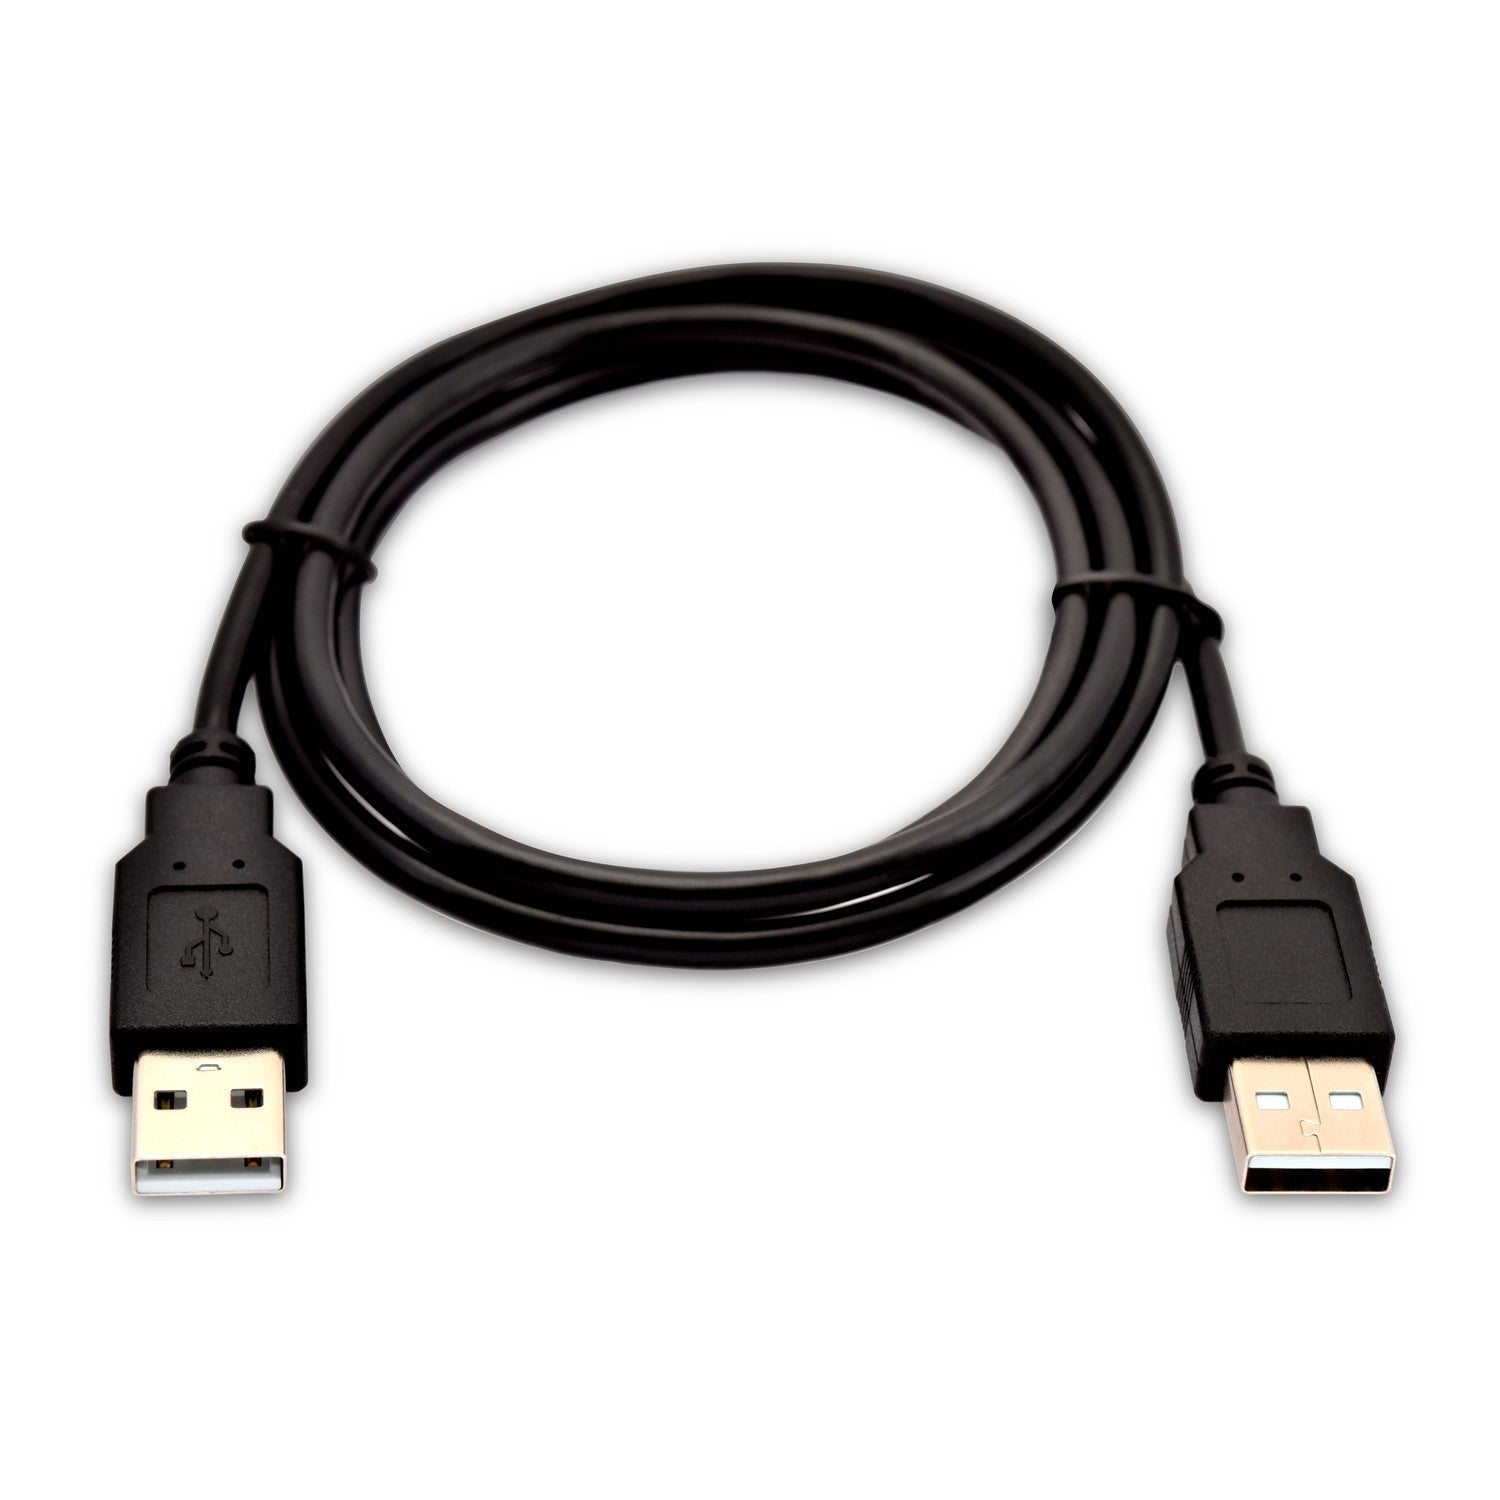 V7 Black USB Cable USB 2.0 A Male to USB 2.0 A Male 1m 3.3ft